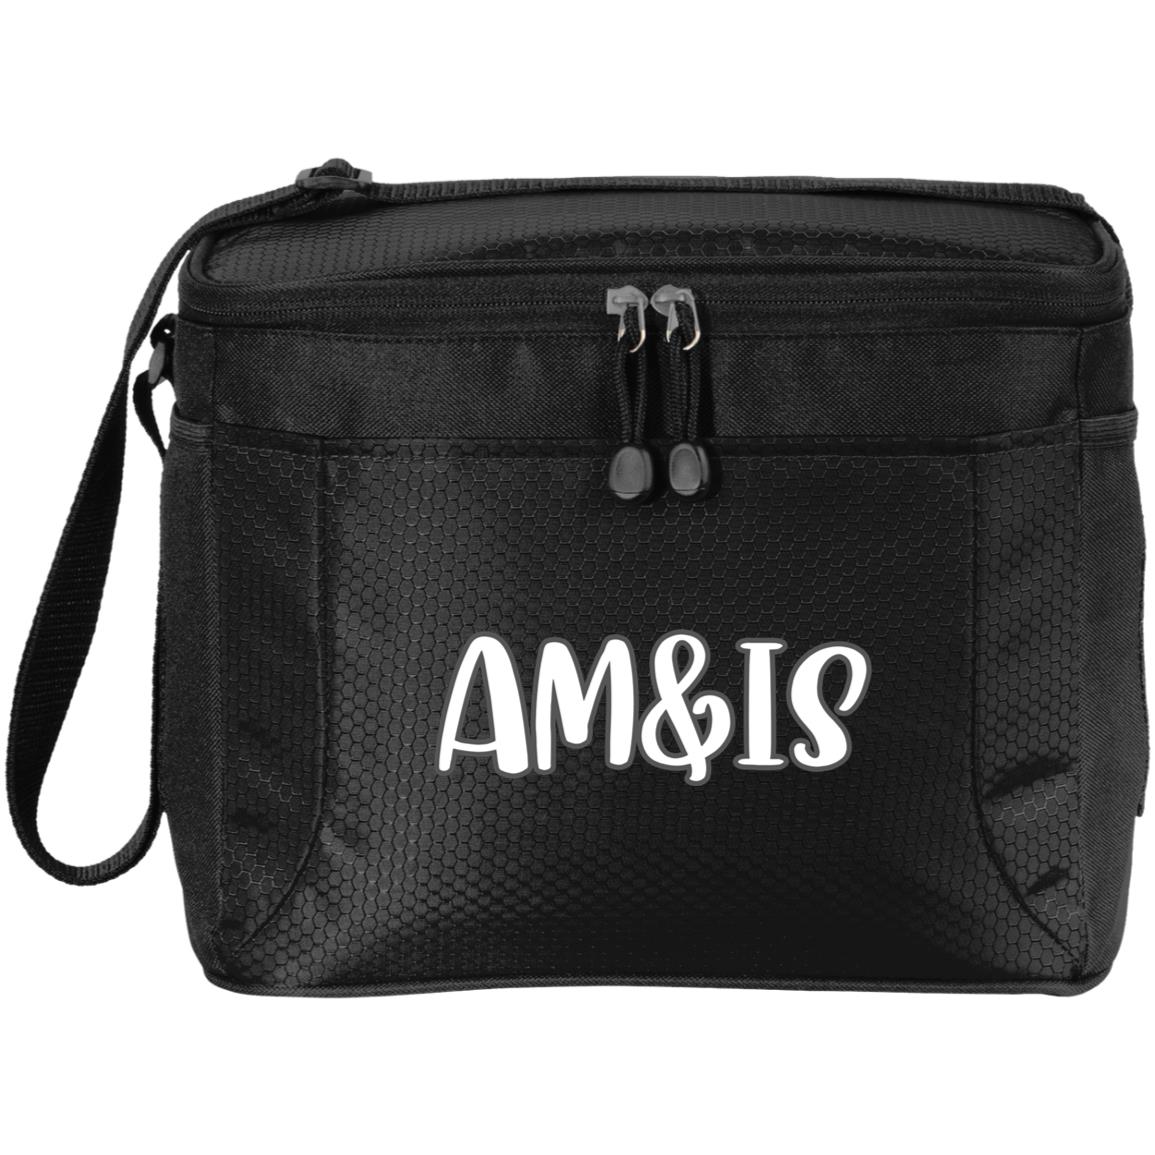 BLACK/BLACK ONE SIZE - AM&IS Activewear 12-Pack Cooler - lunch bag at TFC&H Co.